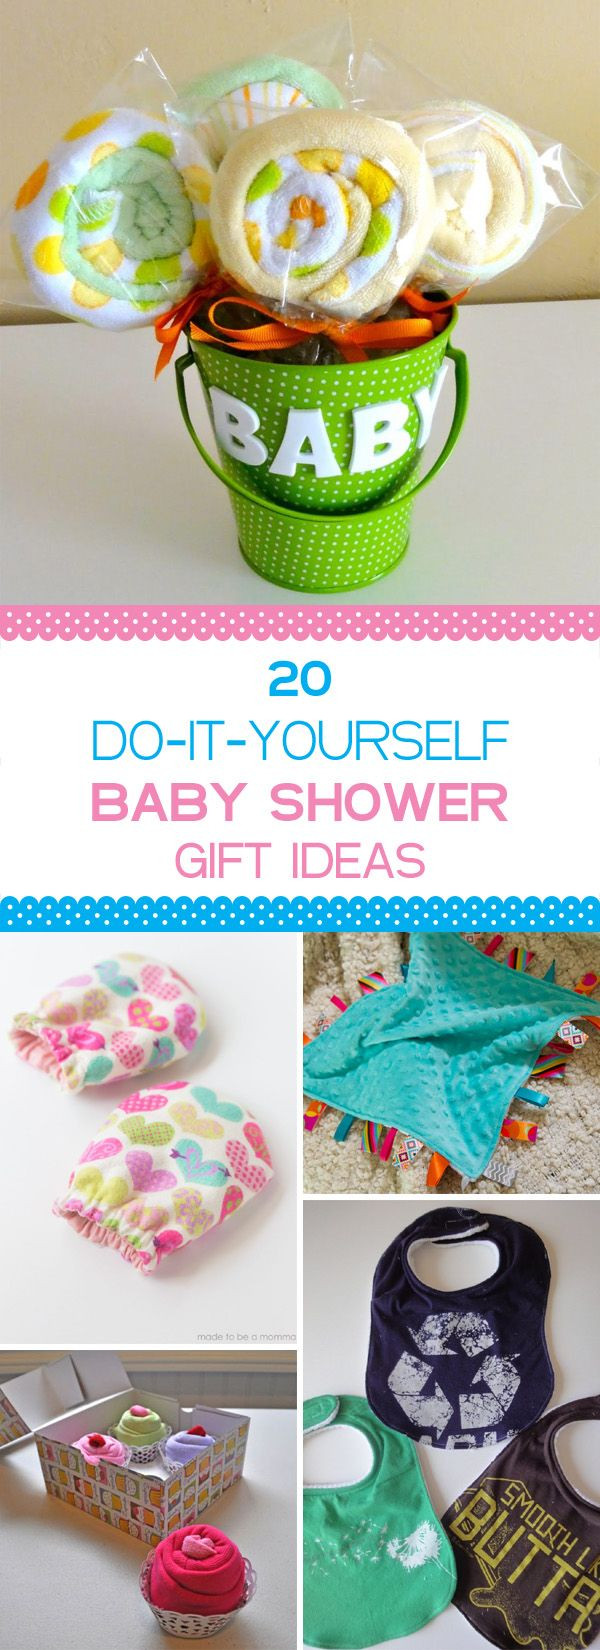 Crafty Baby Shower Gift Ideas
 20 Unique and Creative DIY Baby Shower Gift Ideas